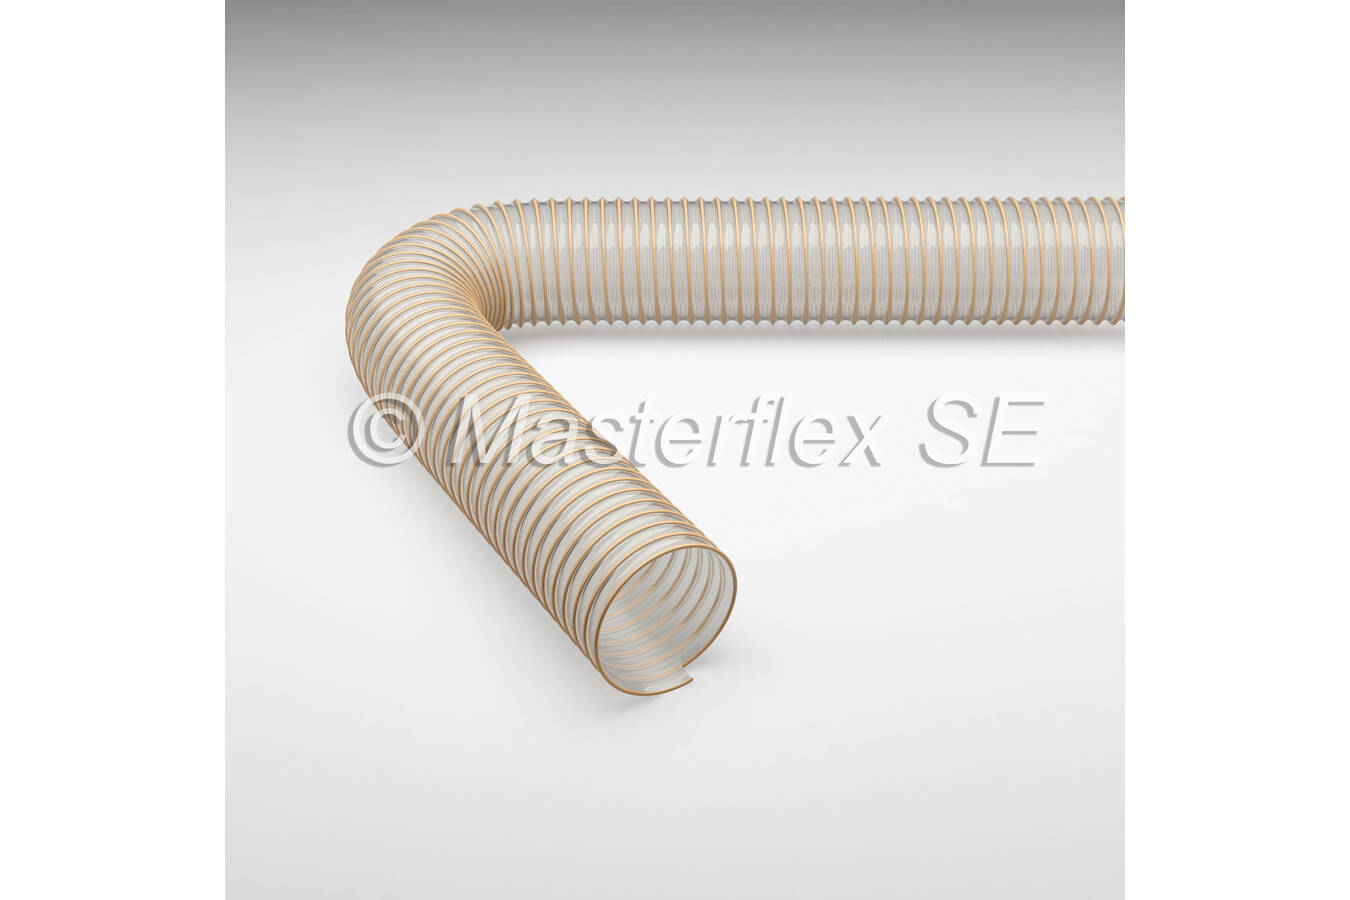 Masterflex presents certified hose for the fish industry The Master-PUR H FishTec hose was specially developed for the fish industry